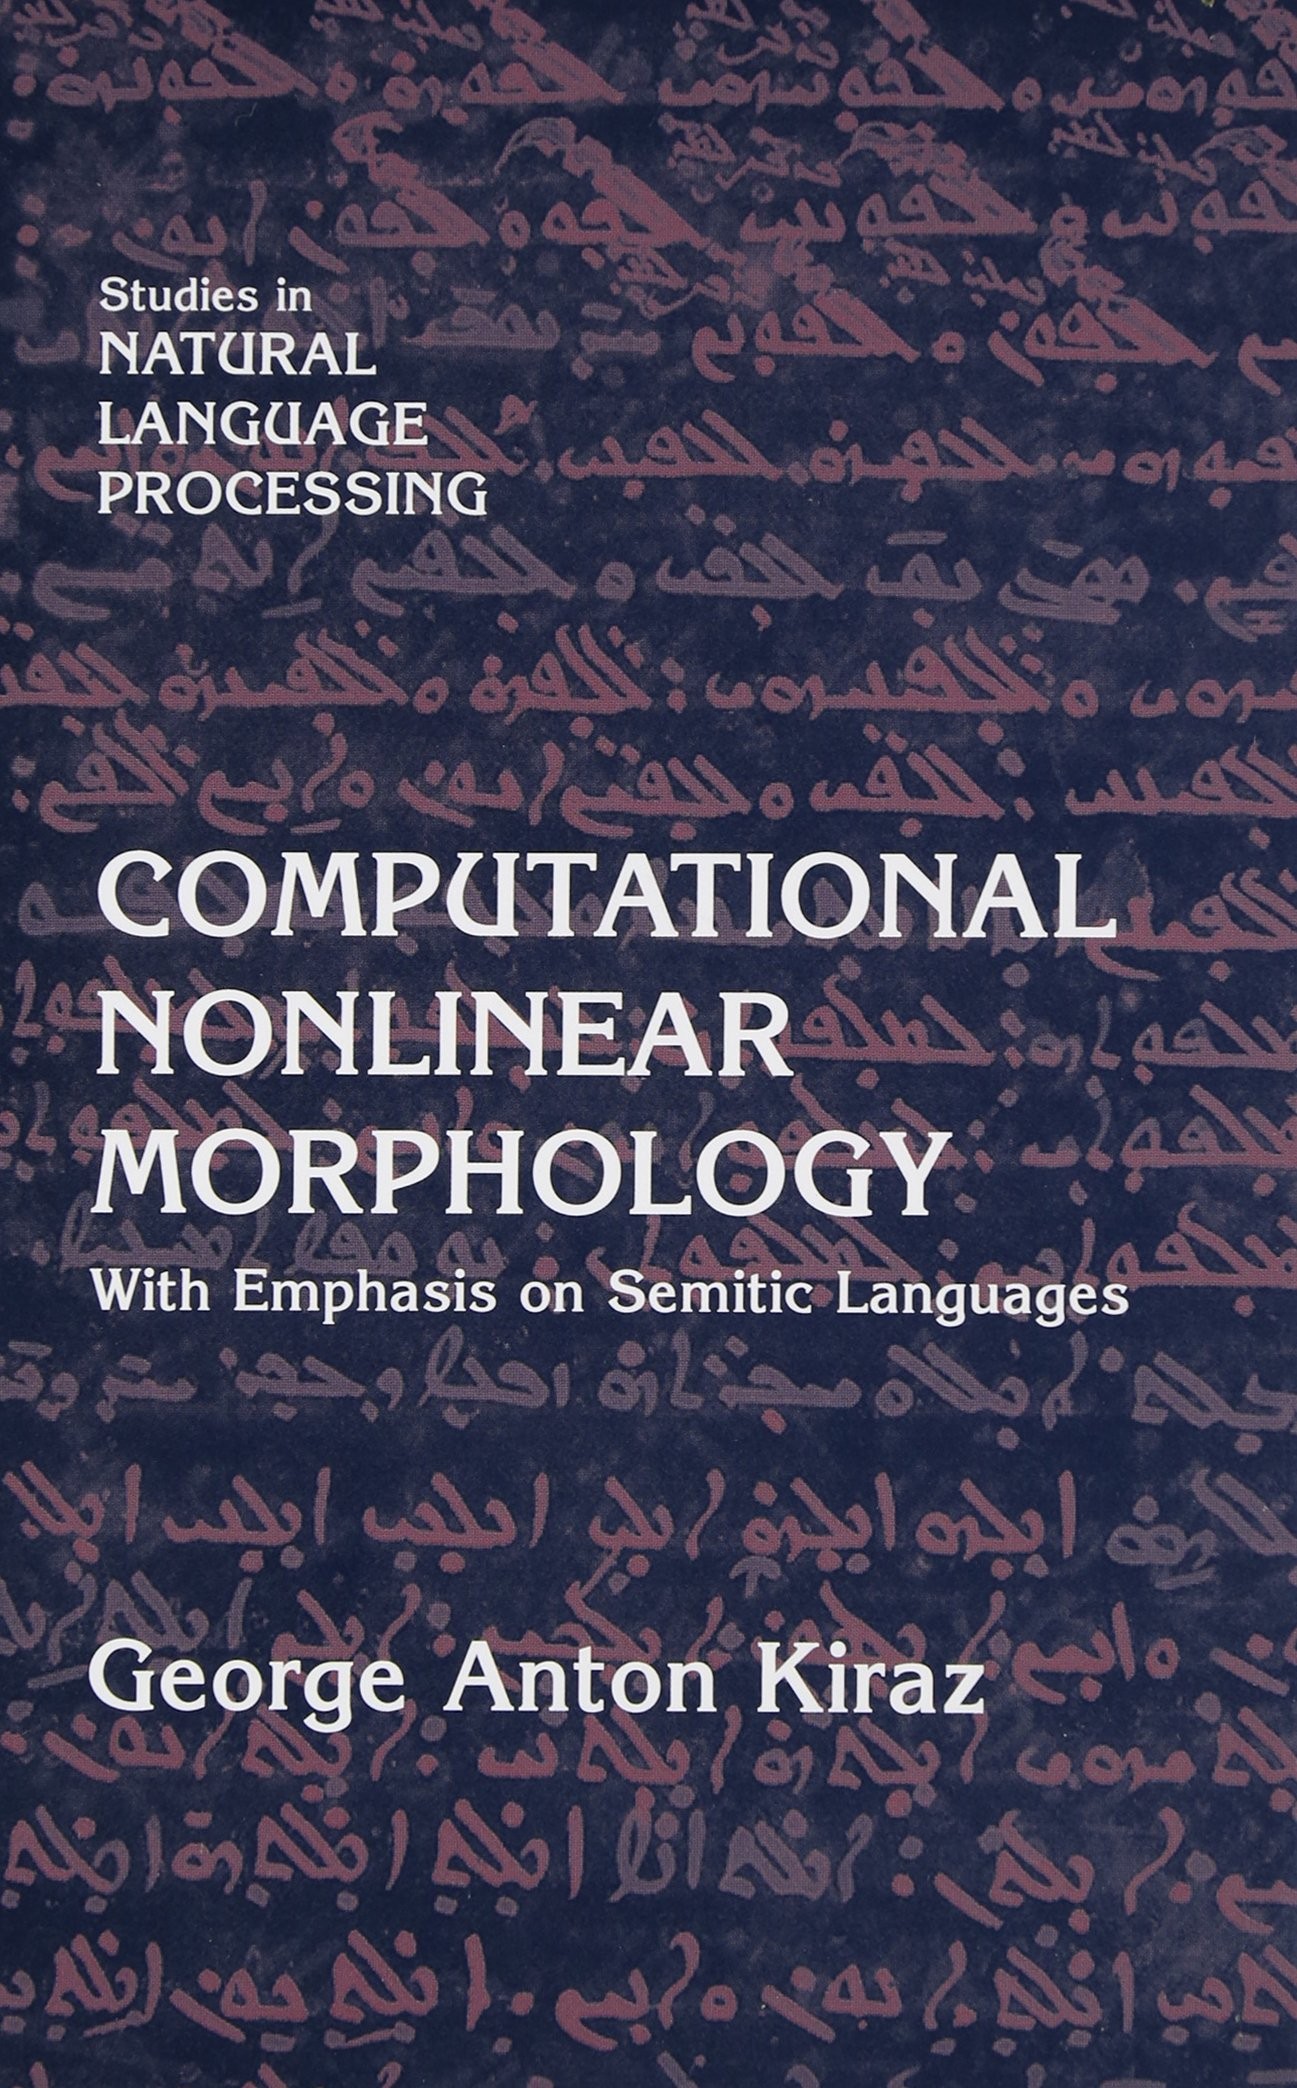 Computational Nonlinear Morphology: with Emphasis on Semitic Languages